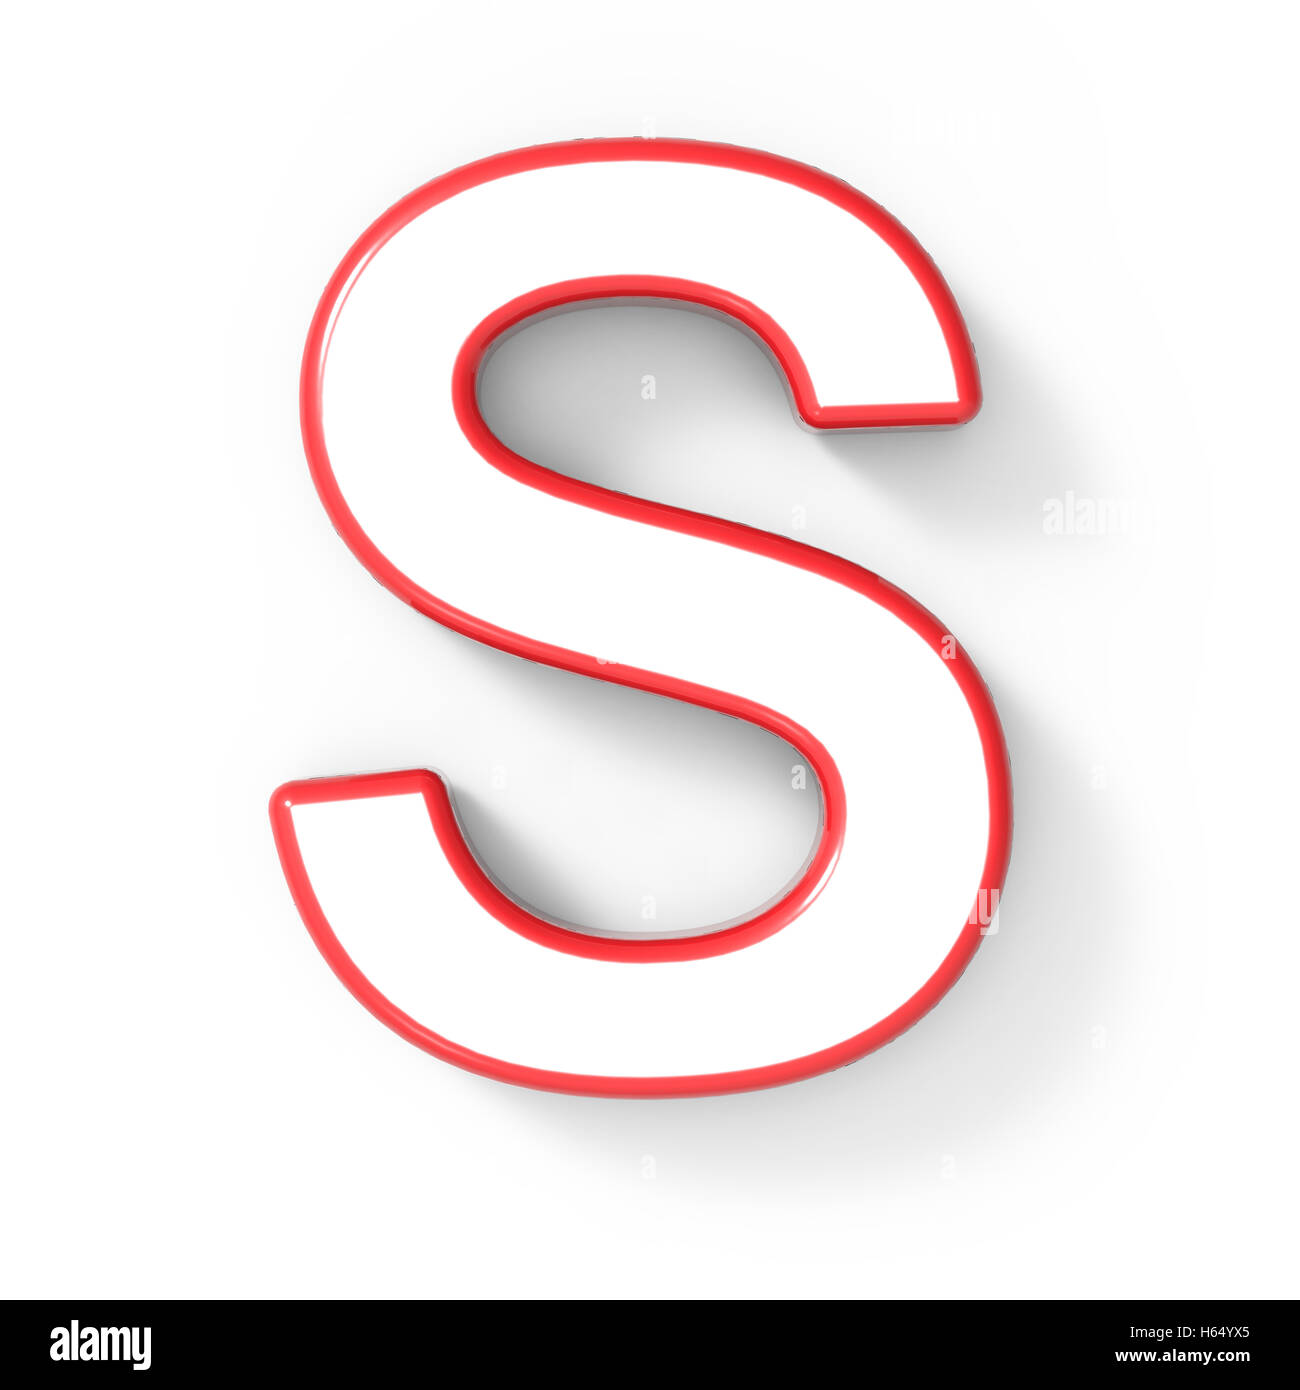 3d rendering white letter S with red frame isolated on white background, 3d illustration, top view Stock Photo